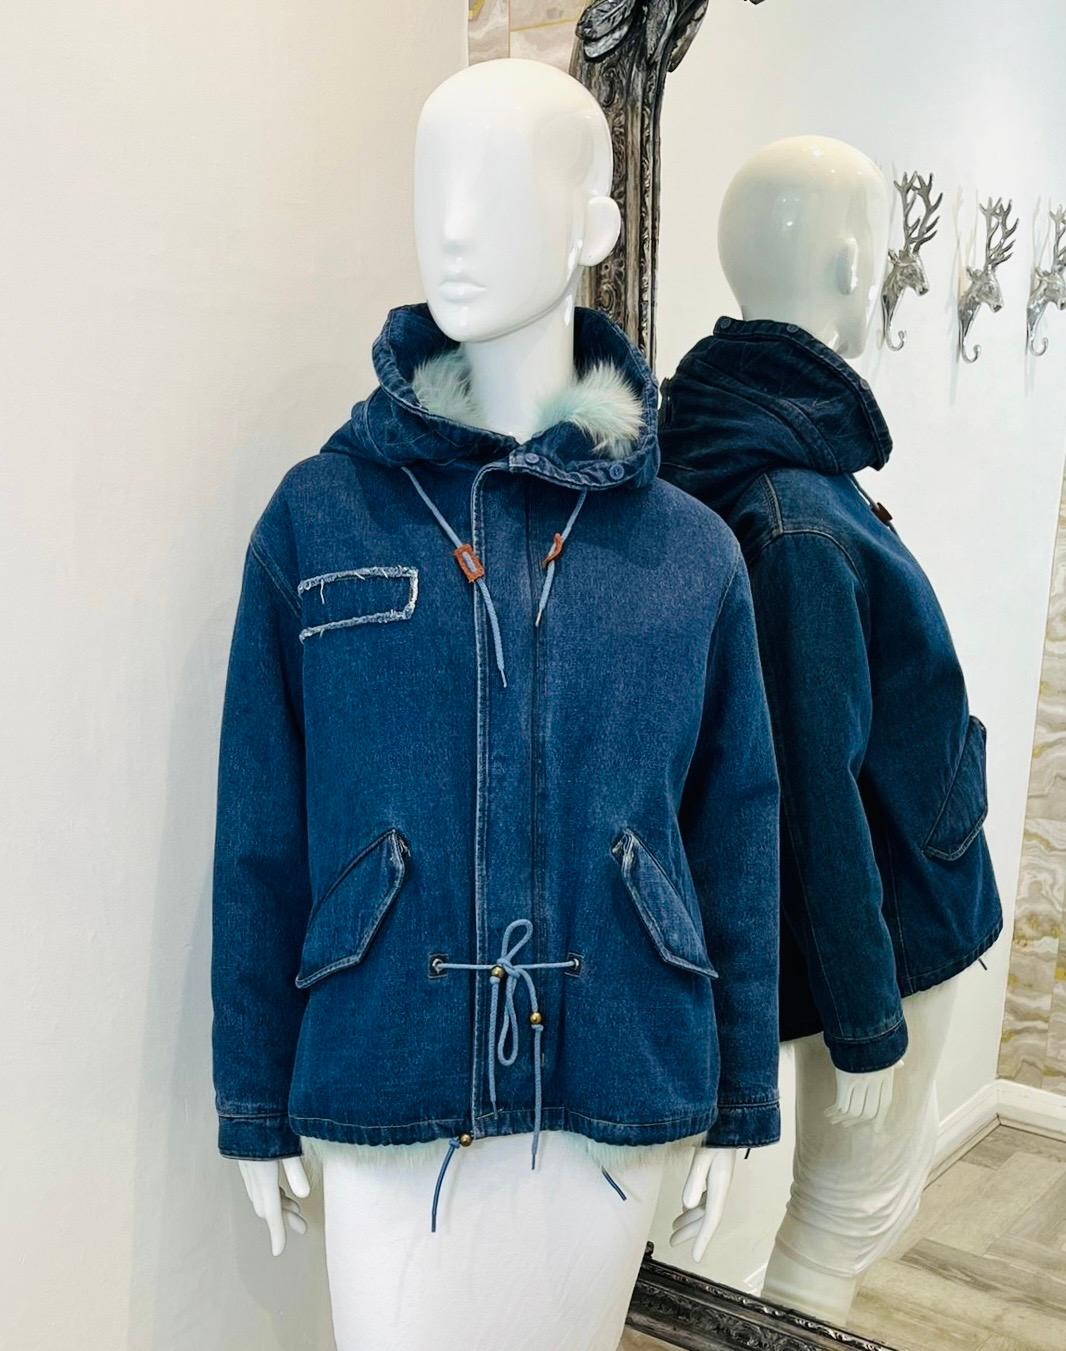 Brand New - Jane & Tash Denim & Fox Fur Parka Coat

Dark blue parka designed with baby blue Fox fur interior and Raccoon lined hood.

Detailed with drawstrings to the hood and waist.

Featuring flap pockets to the sides and zip and snap centre